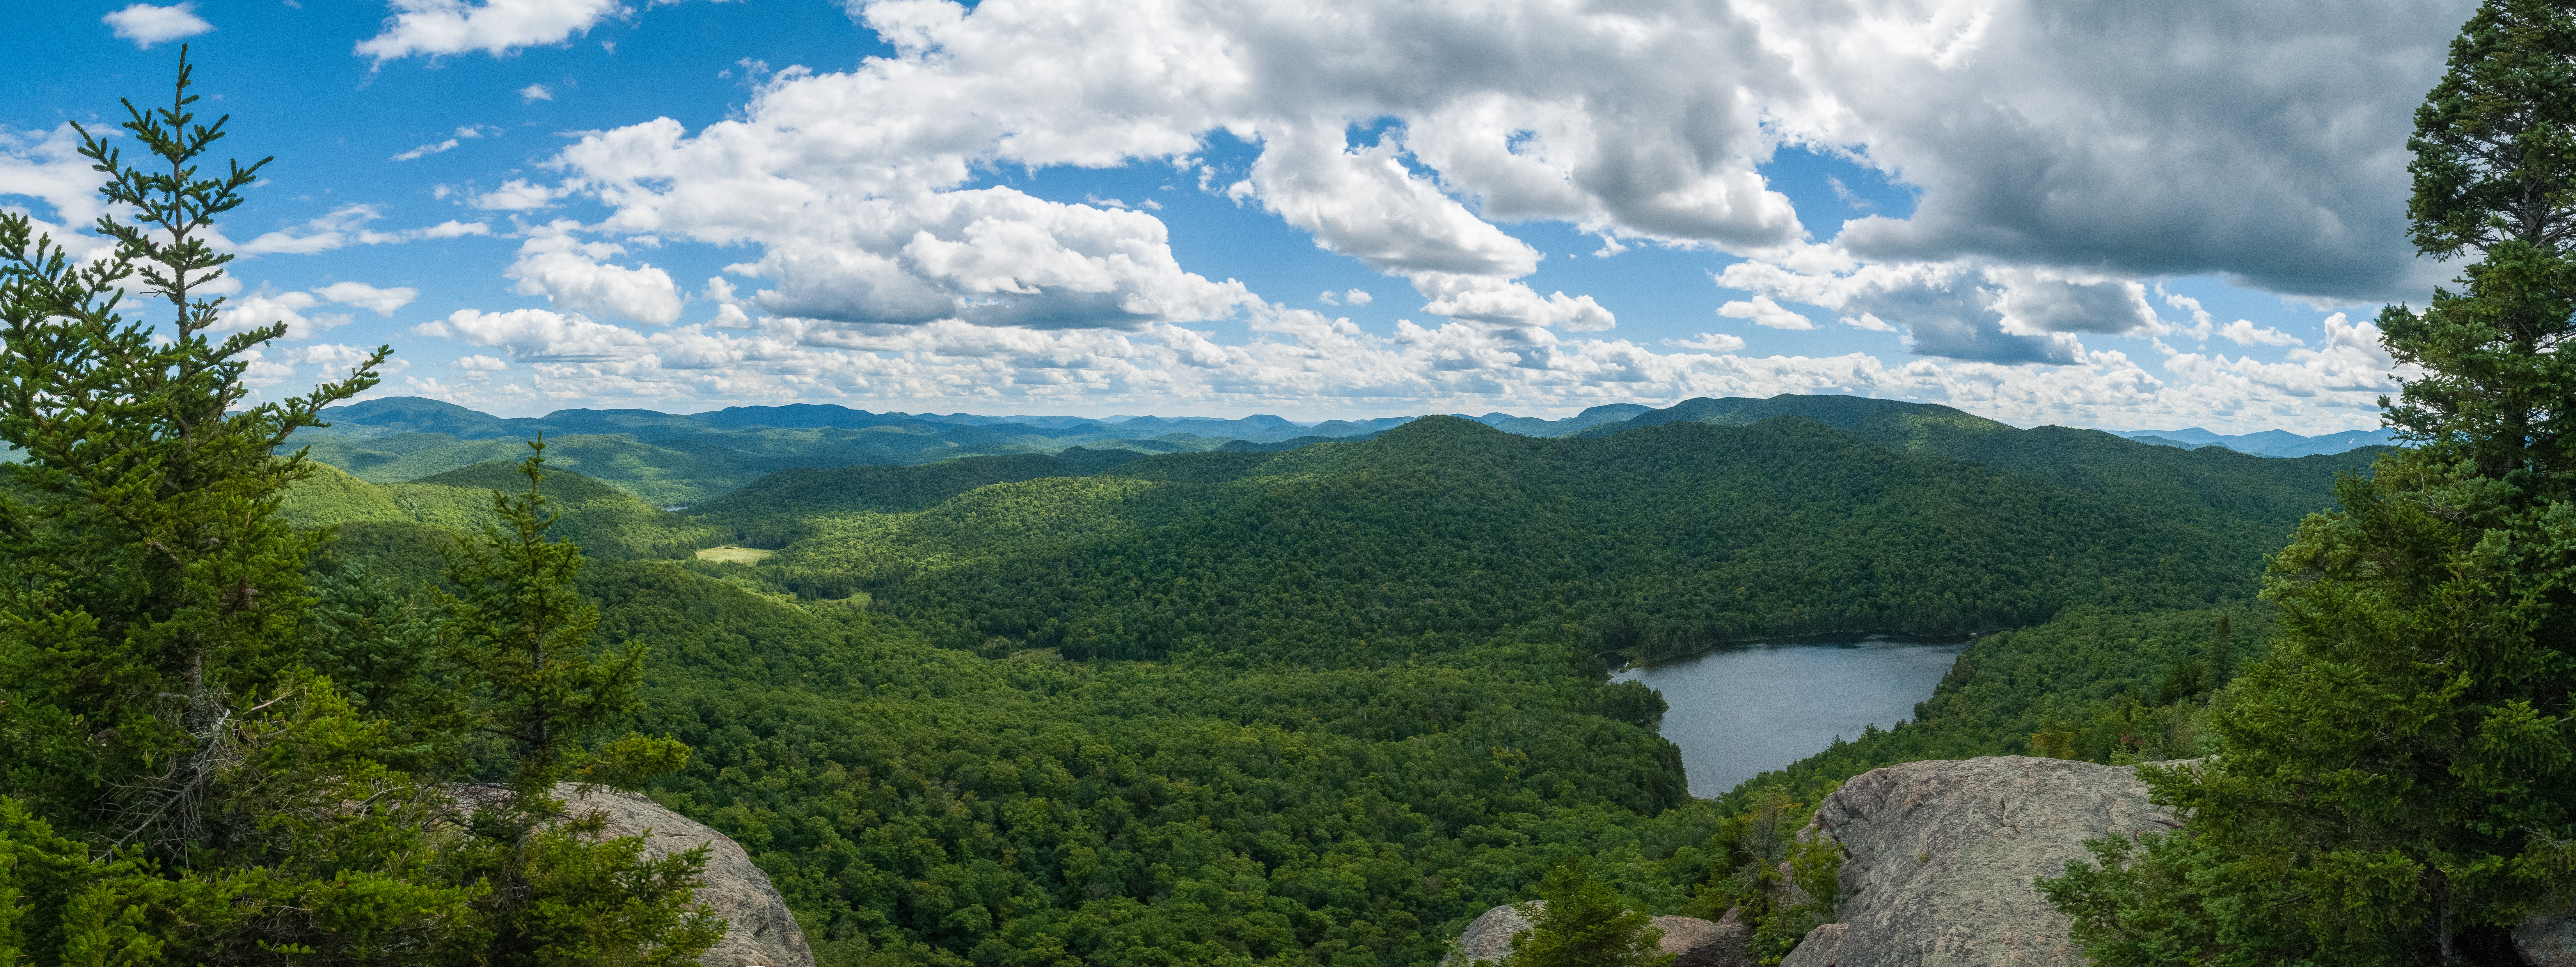 Panormamic view from Peaked Mountain Summit, Adirondack Park, NY.